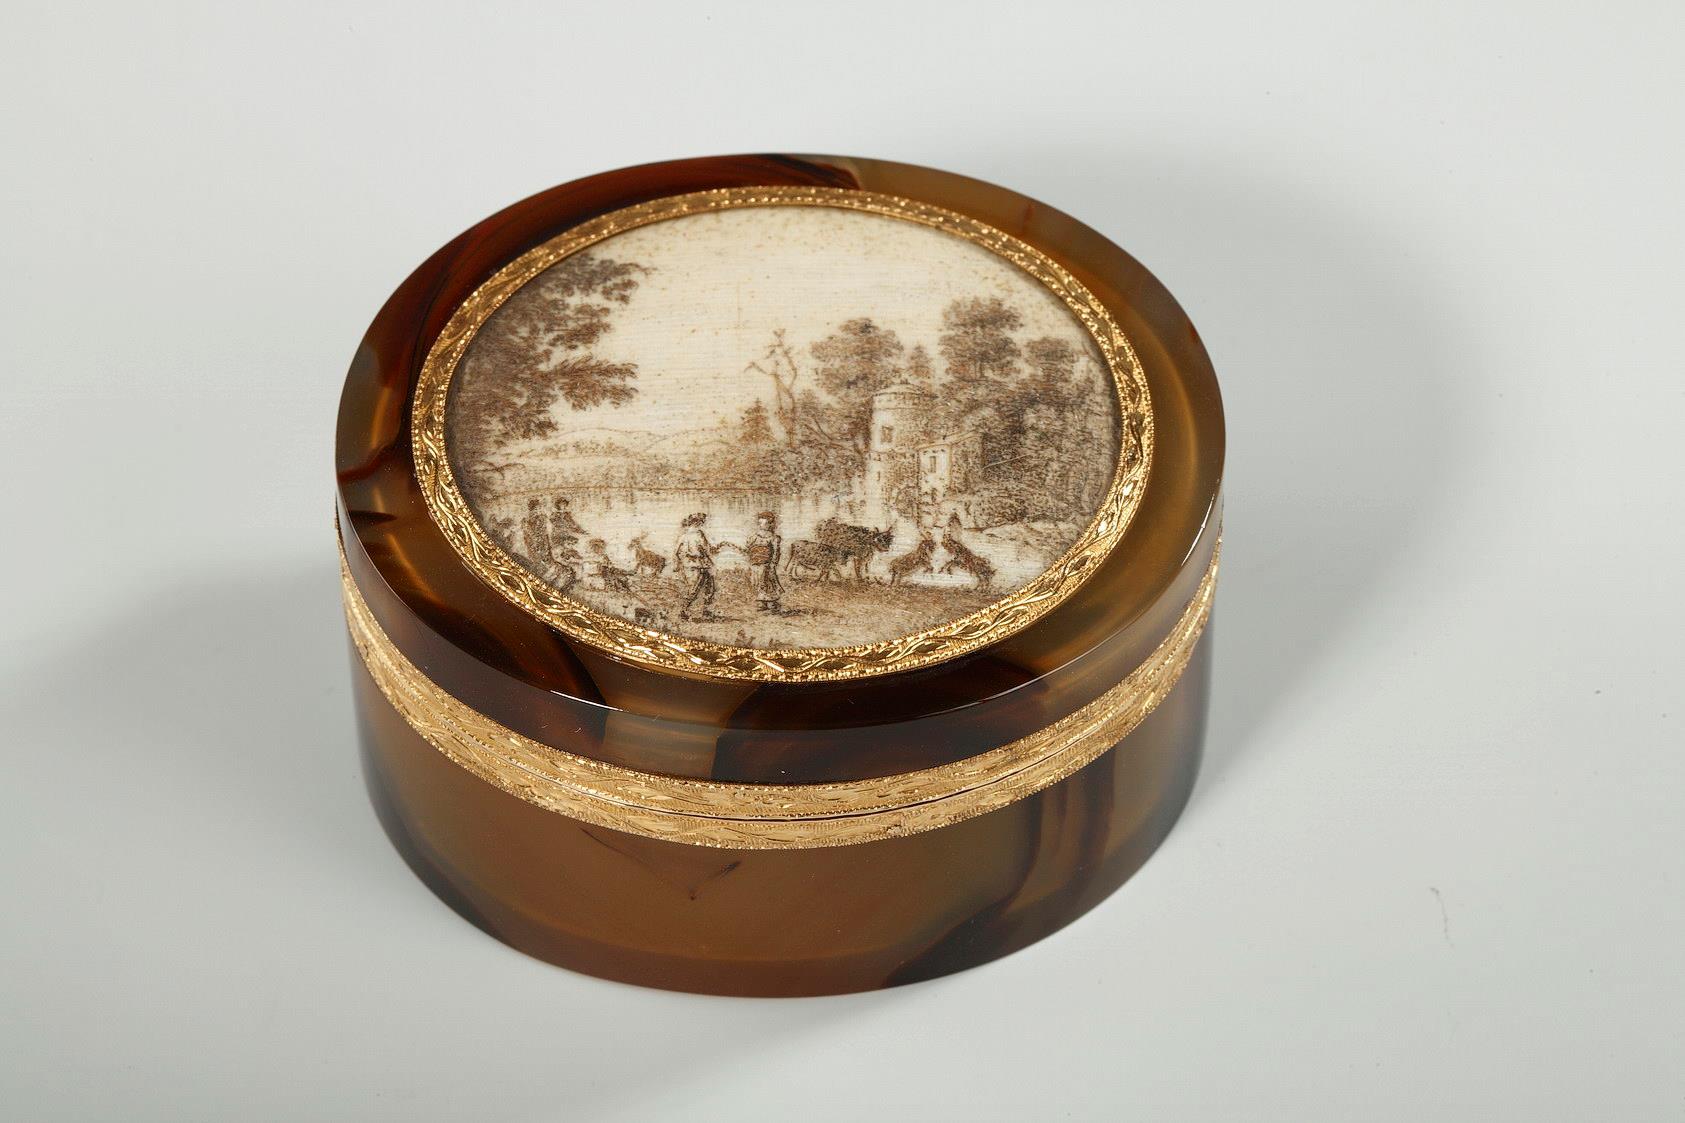 Agate and Gold Box with Miniature – 18th Century